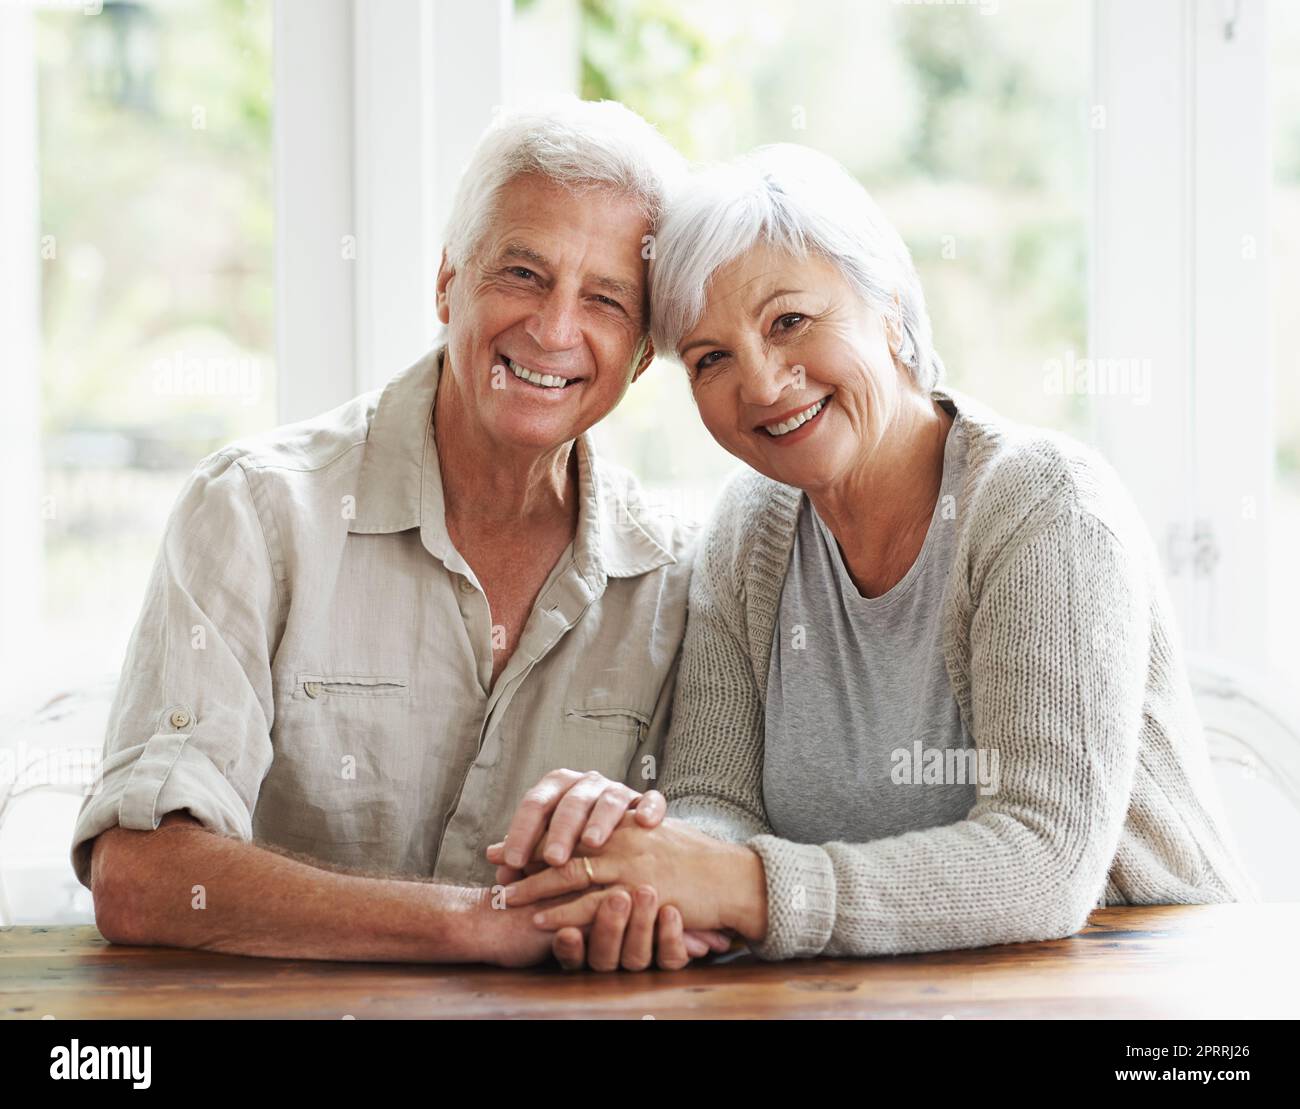 Marriage is easy when youre married to your best friend. A loving senior couple holding hands as they sit at a table. Stock Photo